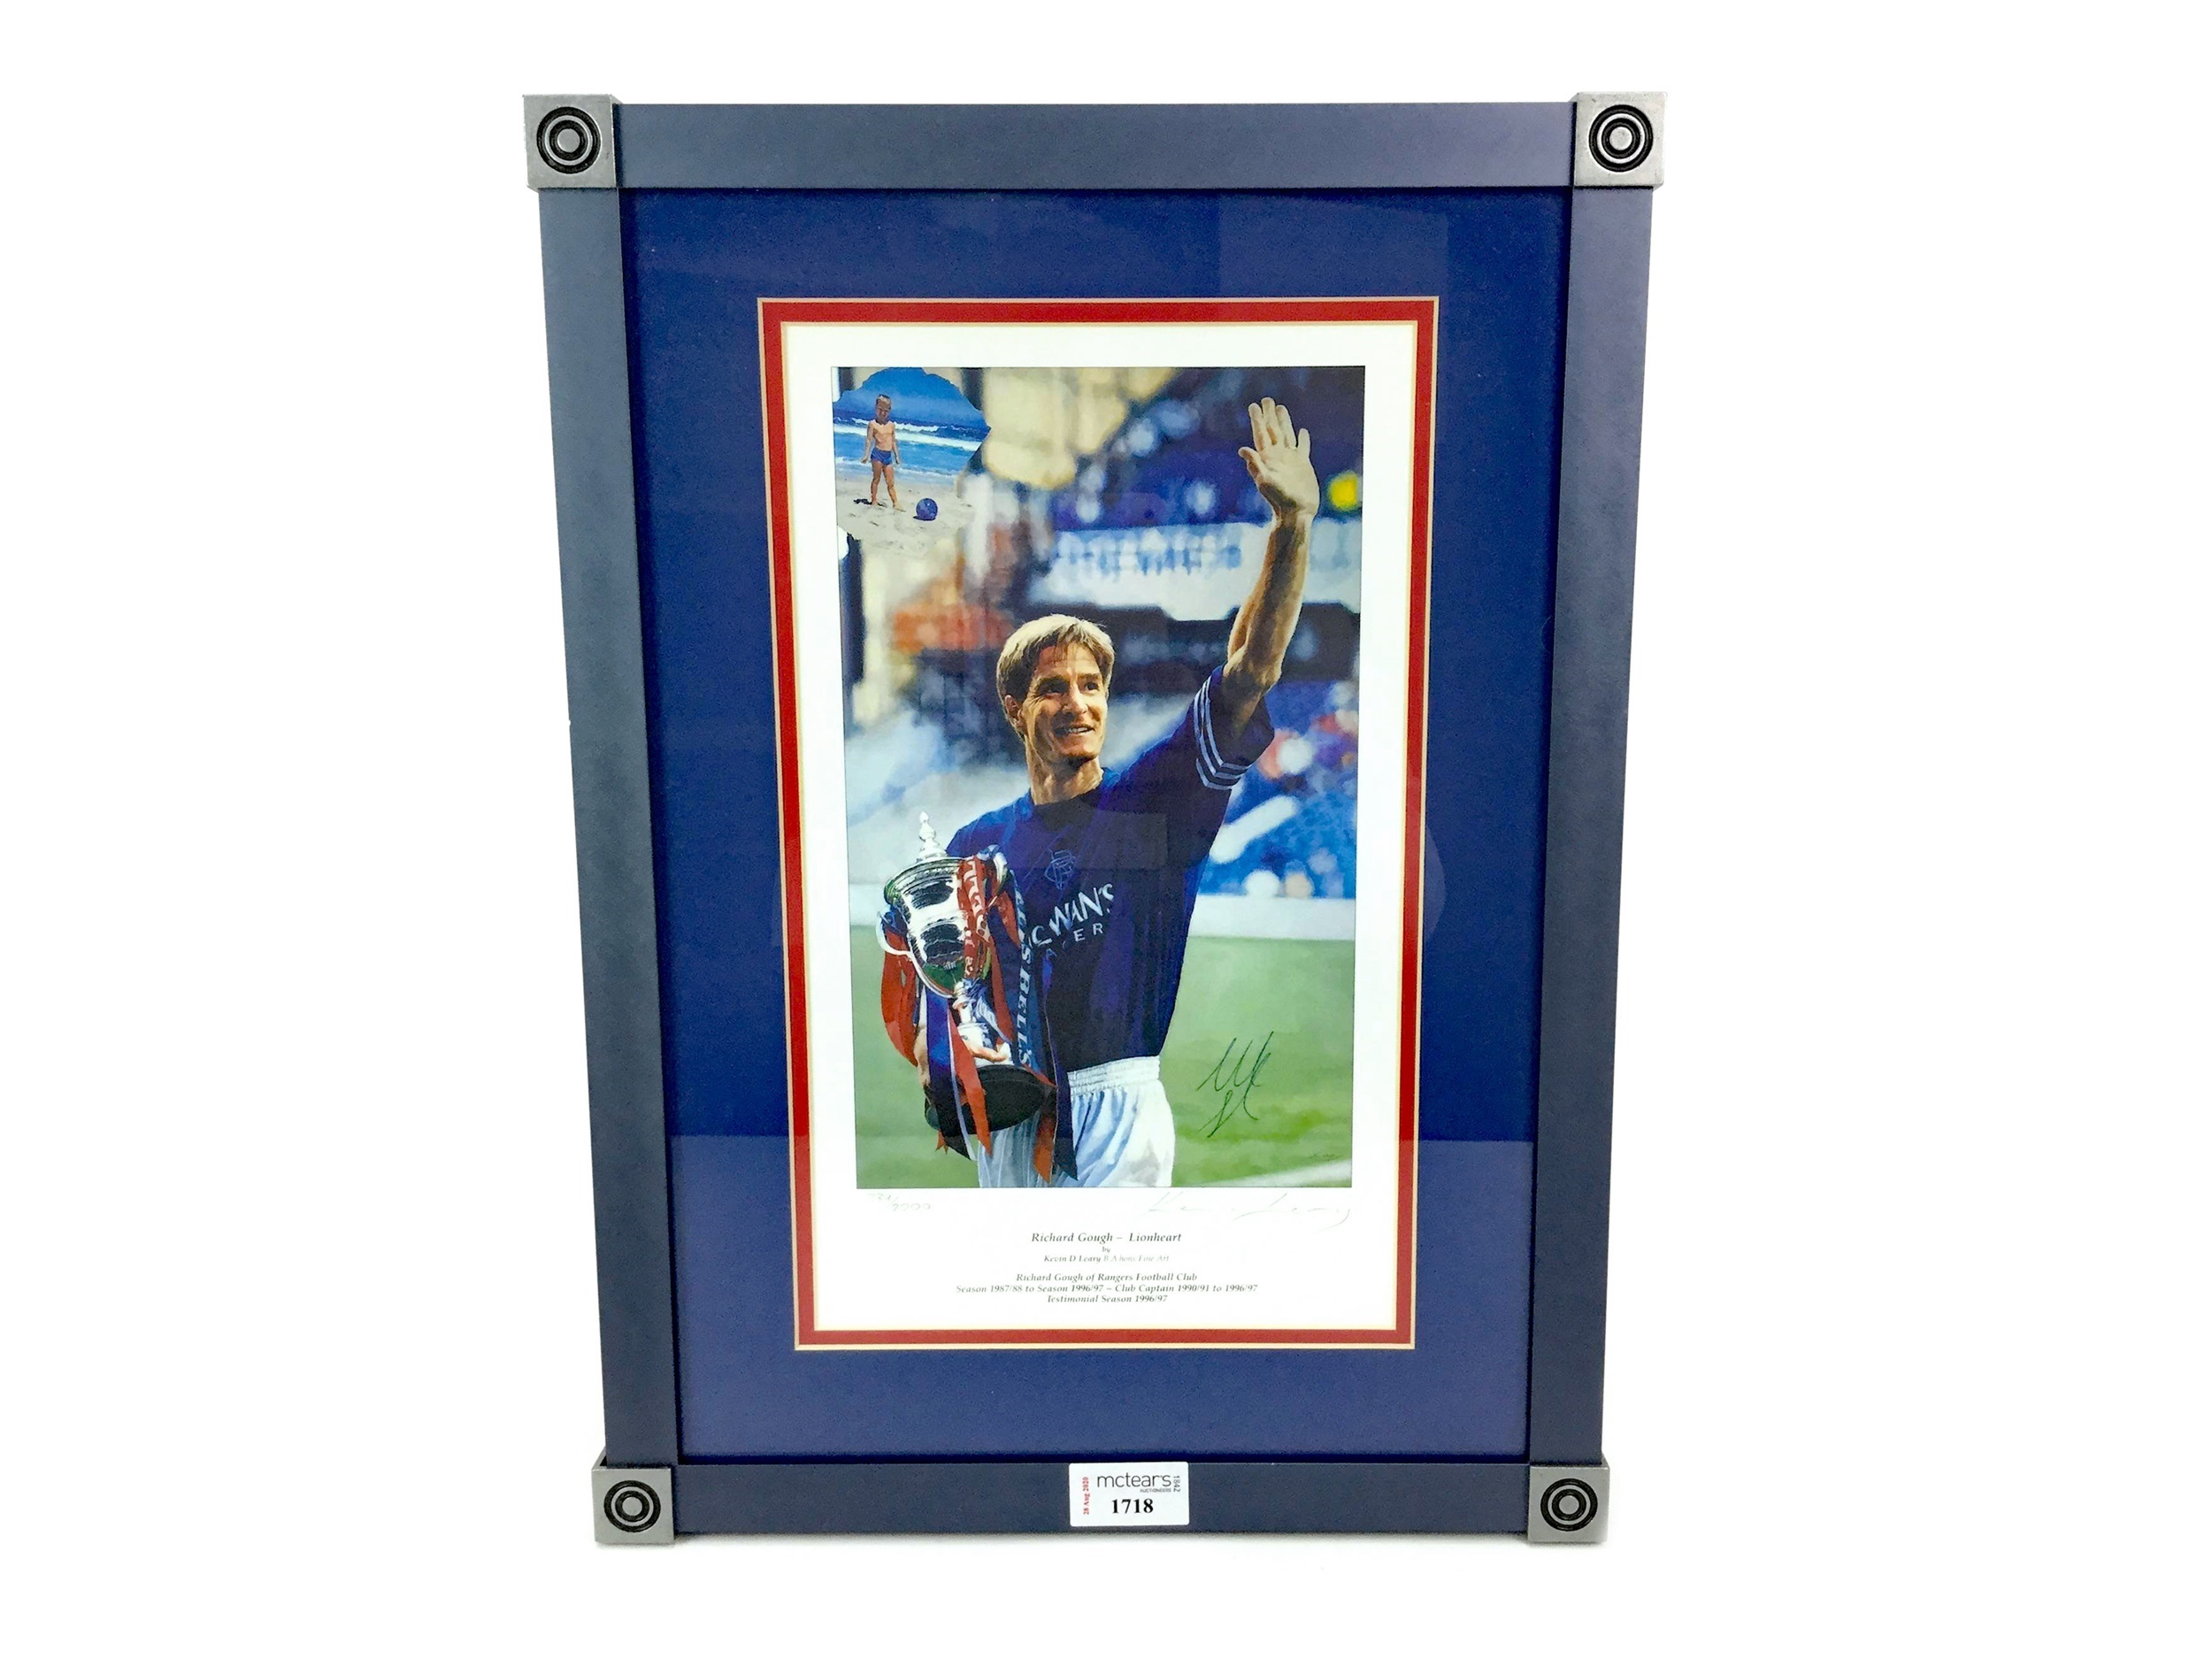 A FRAMED PRINT OF RICHARD GOUGH BY KEVIN LEARY, SIGNED BY THE PLAYER